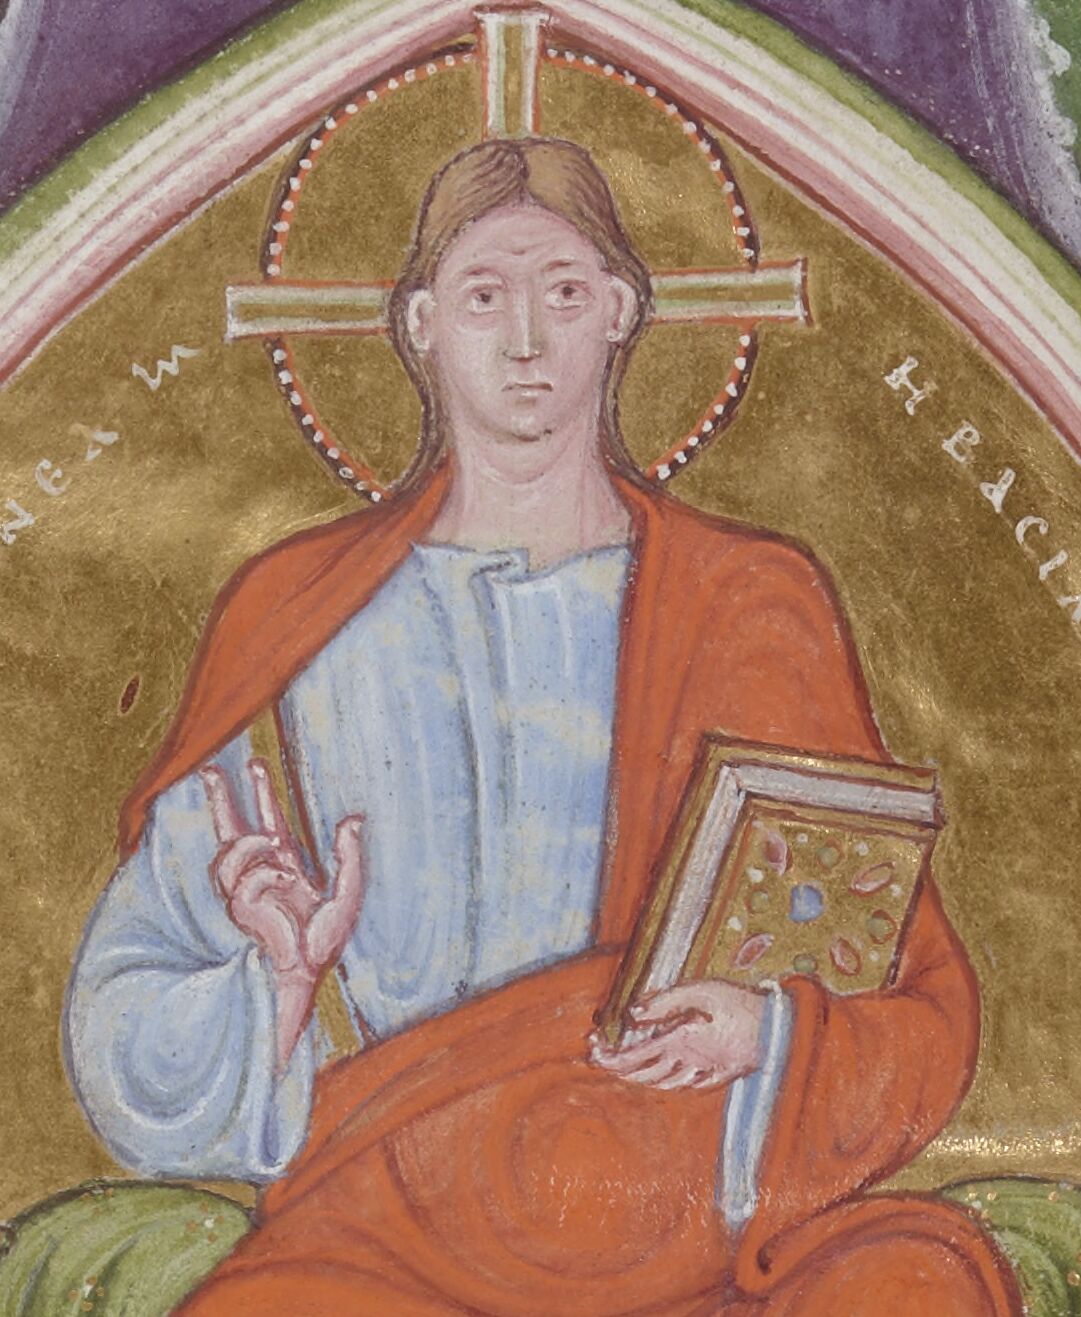 Jesus holds a book